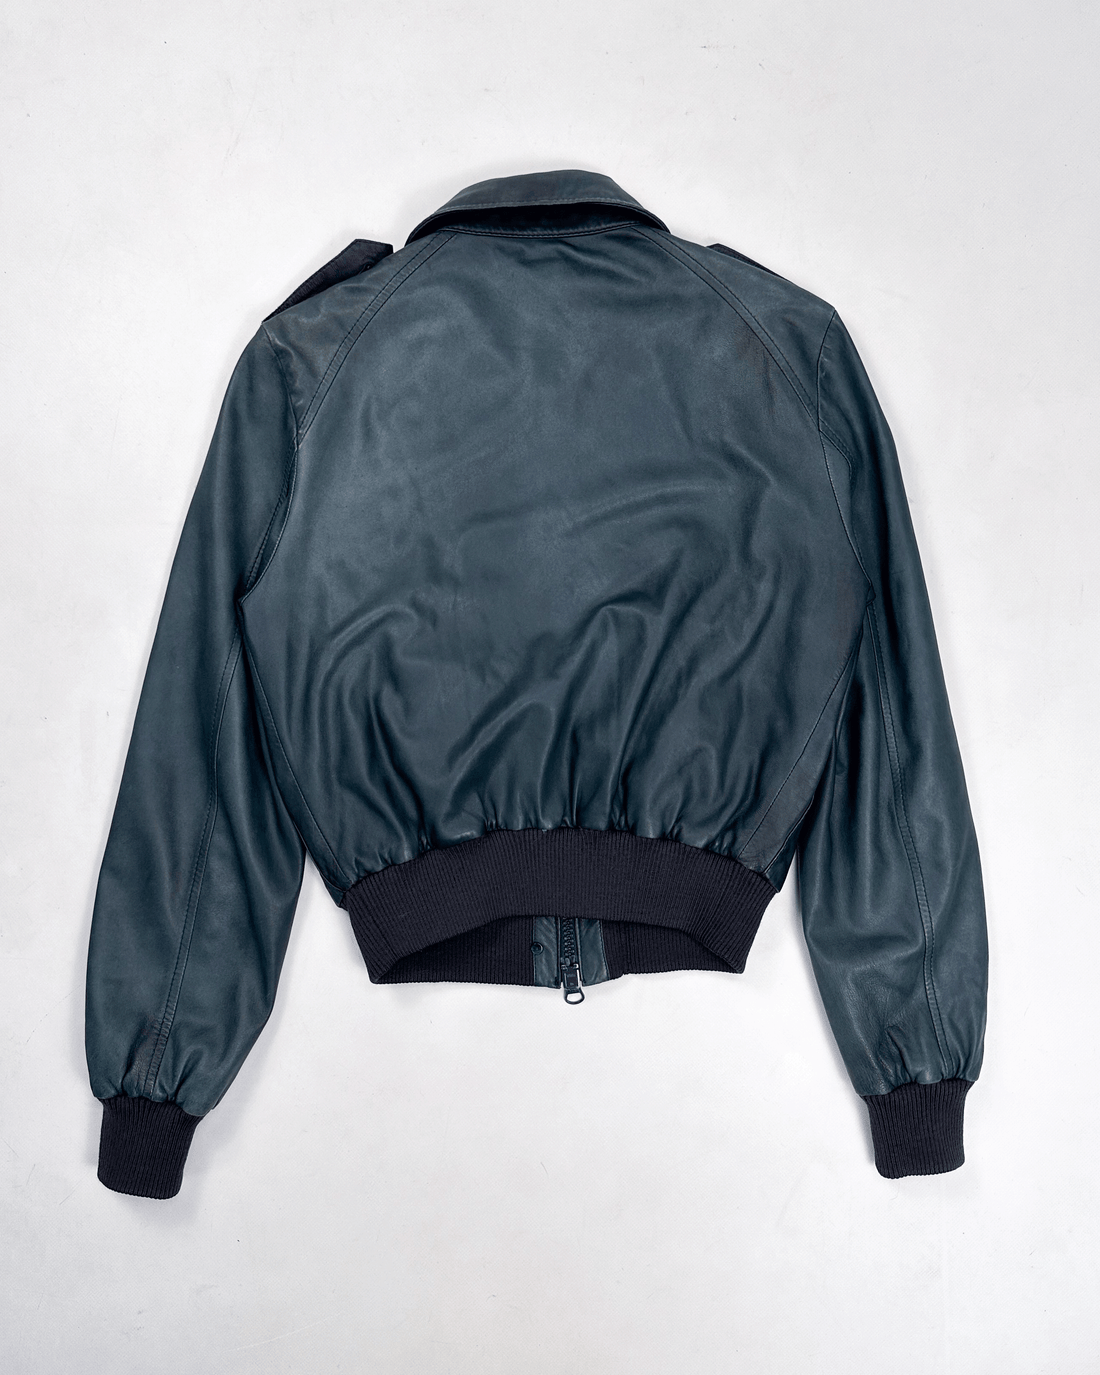 See by Chloé Leather Bomber Deep Green Jacket 2000's